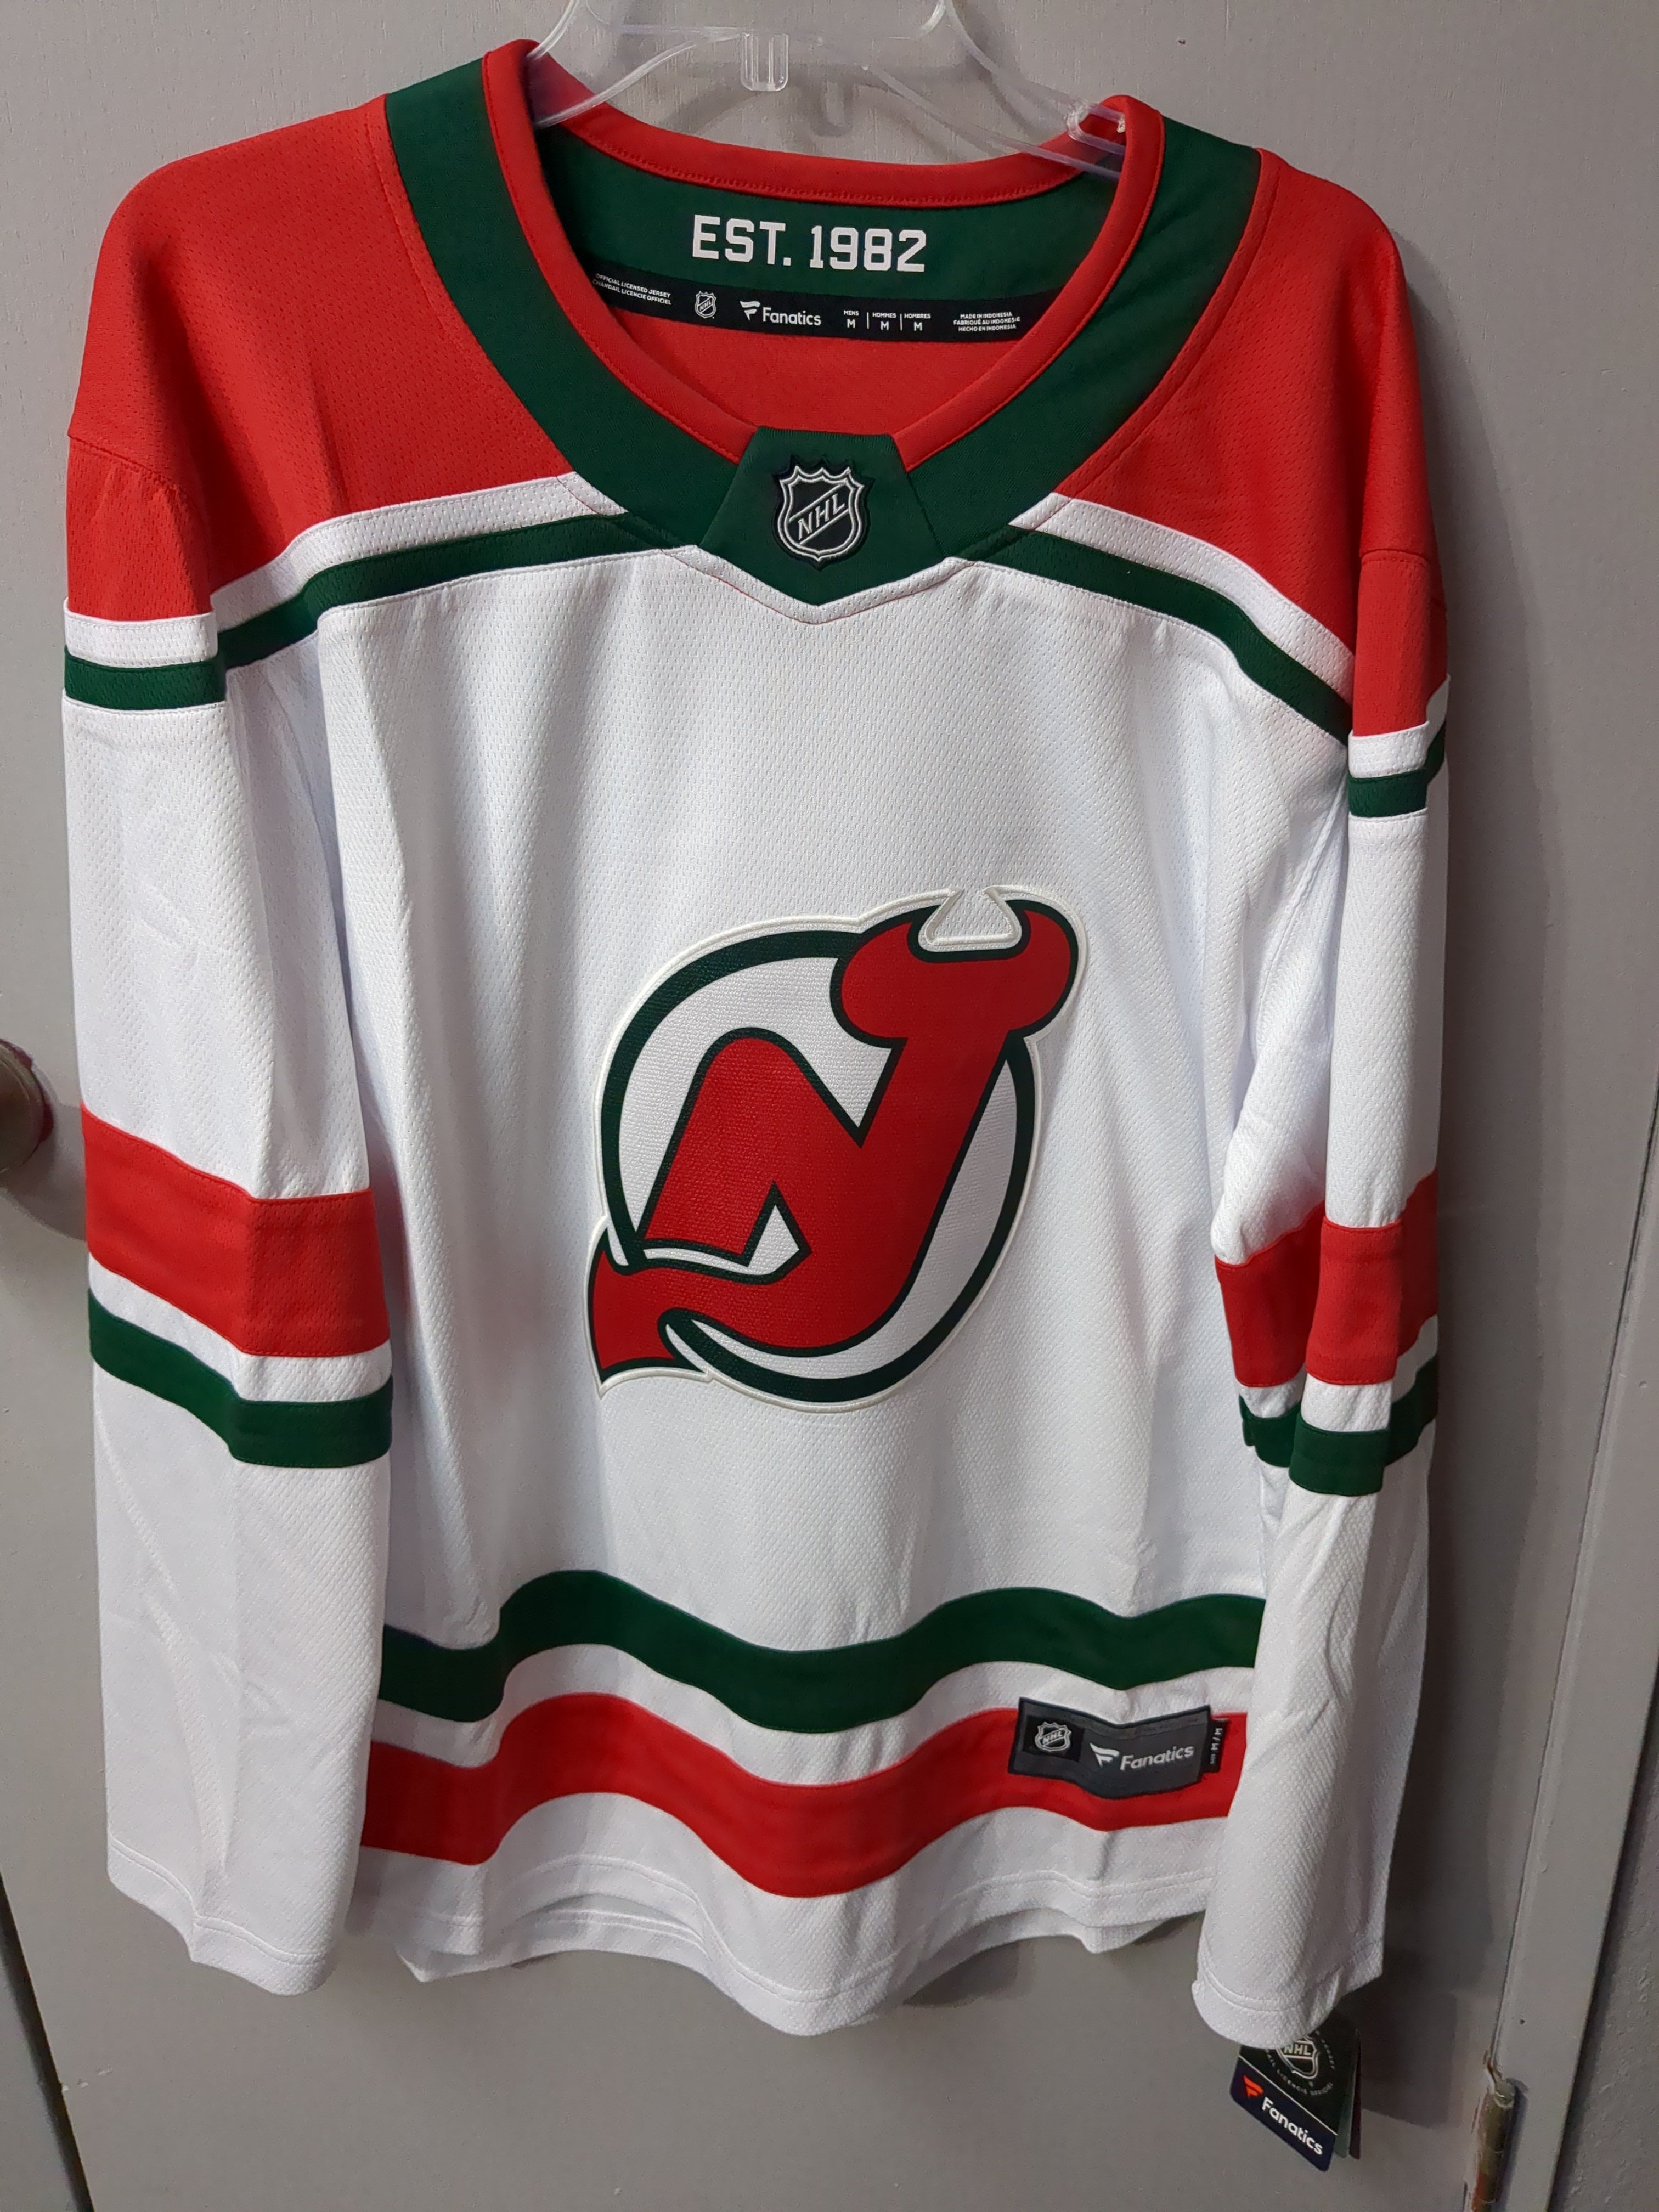 The Devils' new alternate sweaters are a Jersey disaster